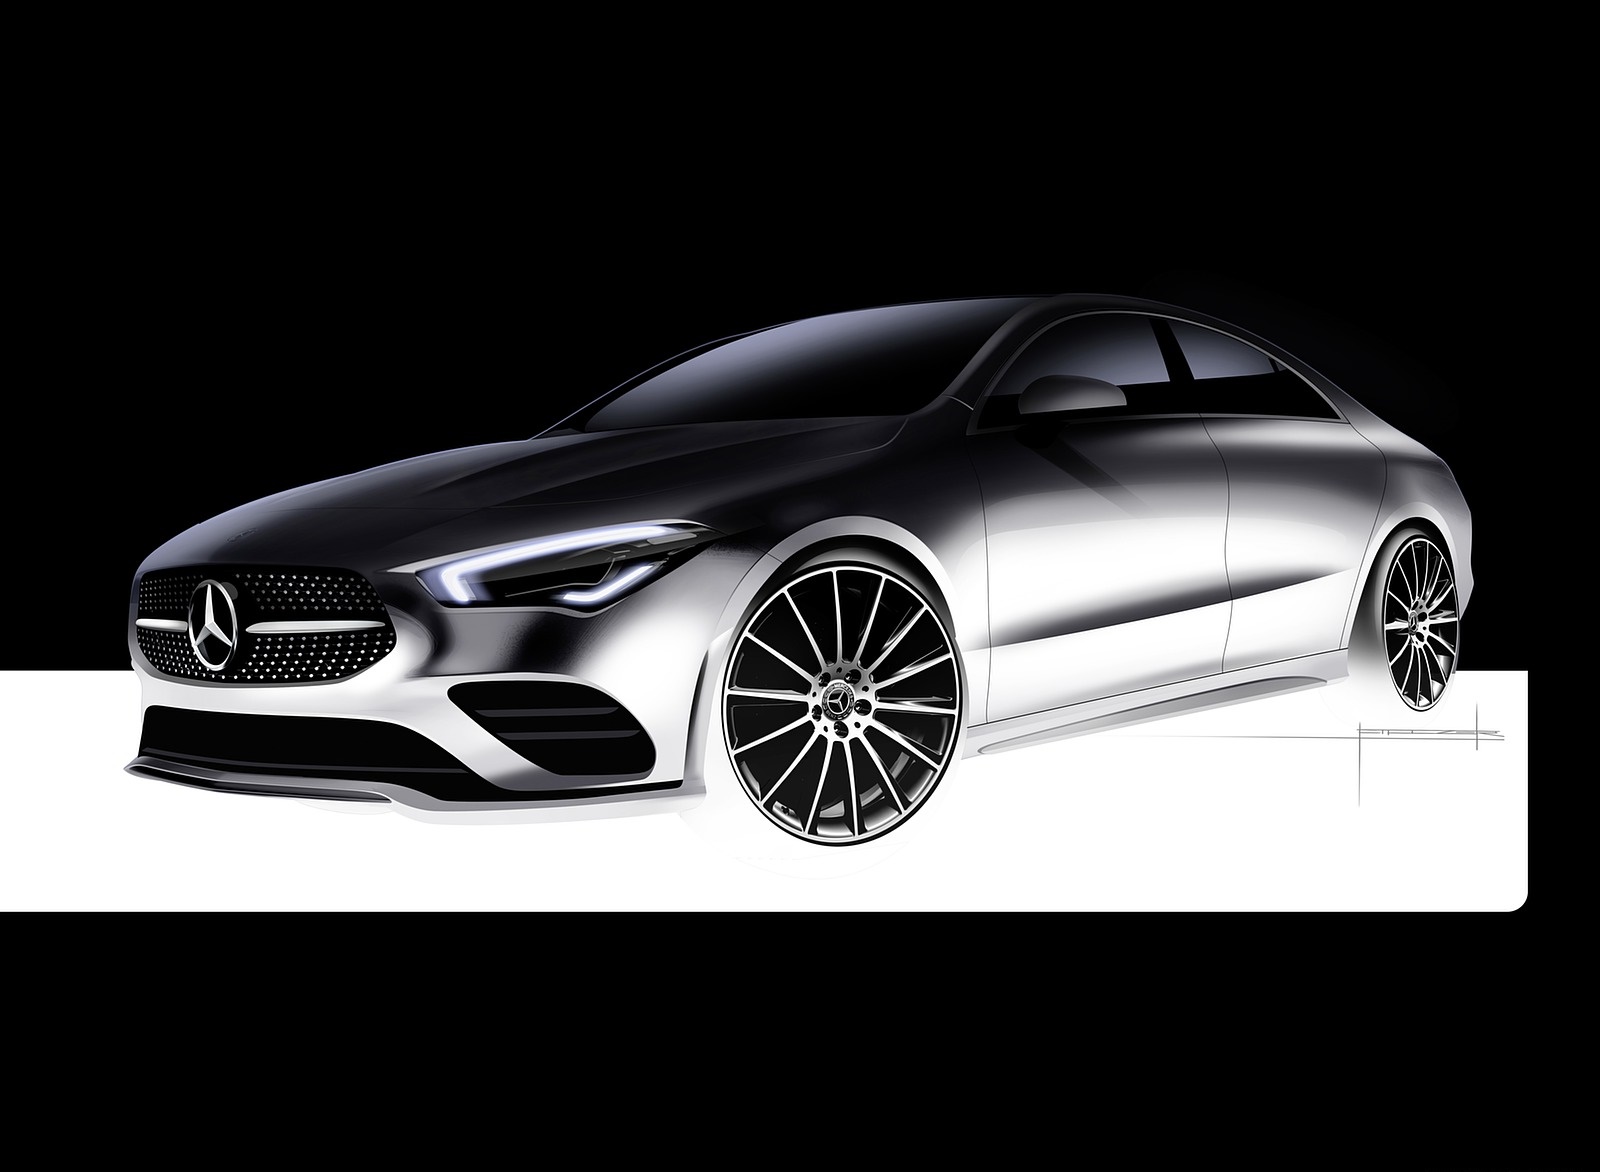 2020 Mercedes-Benz CLA 250 Coupe Design Sketch Wallpapers #132 of 133